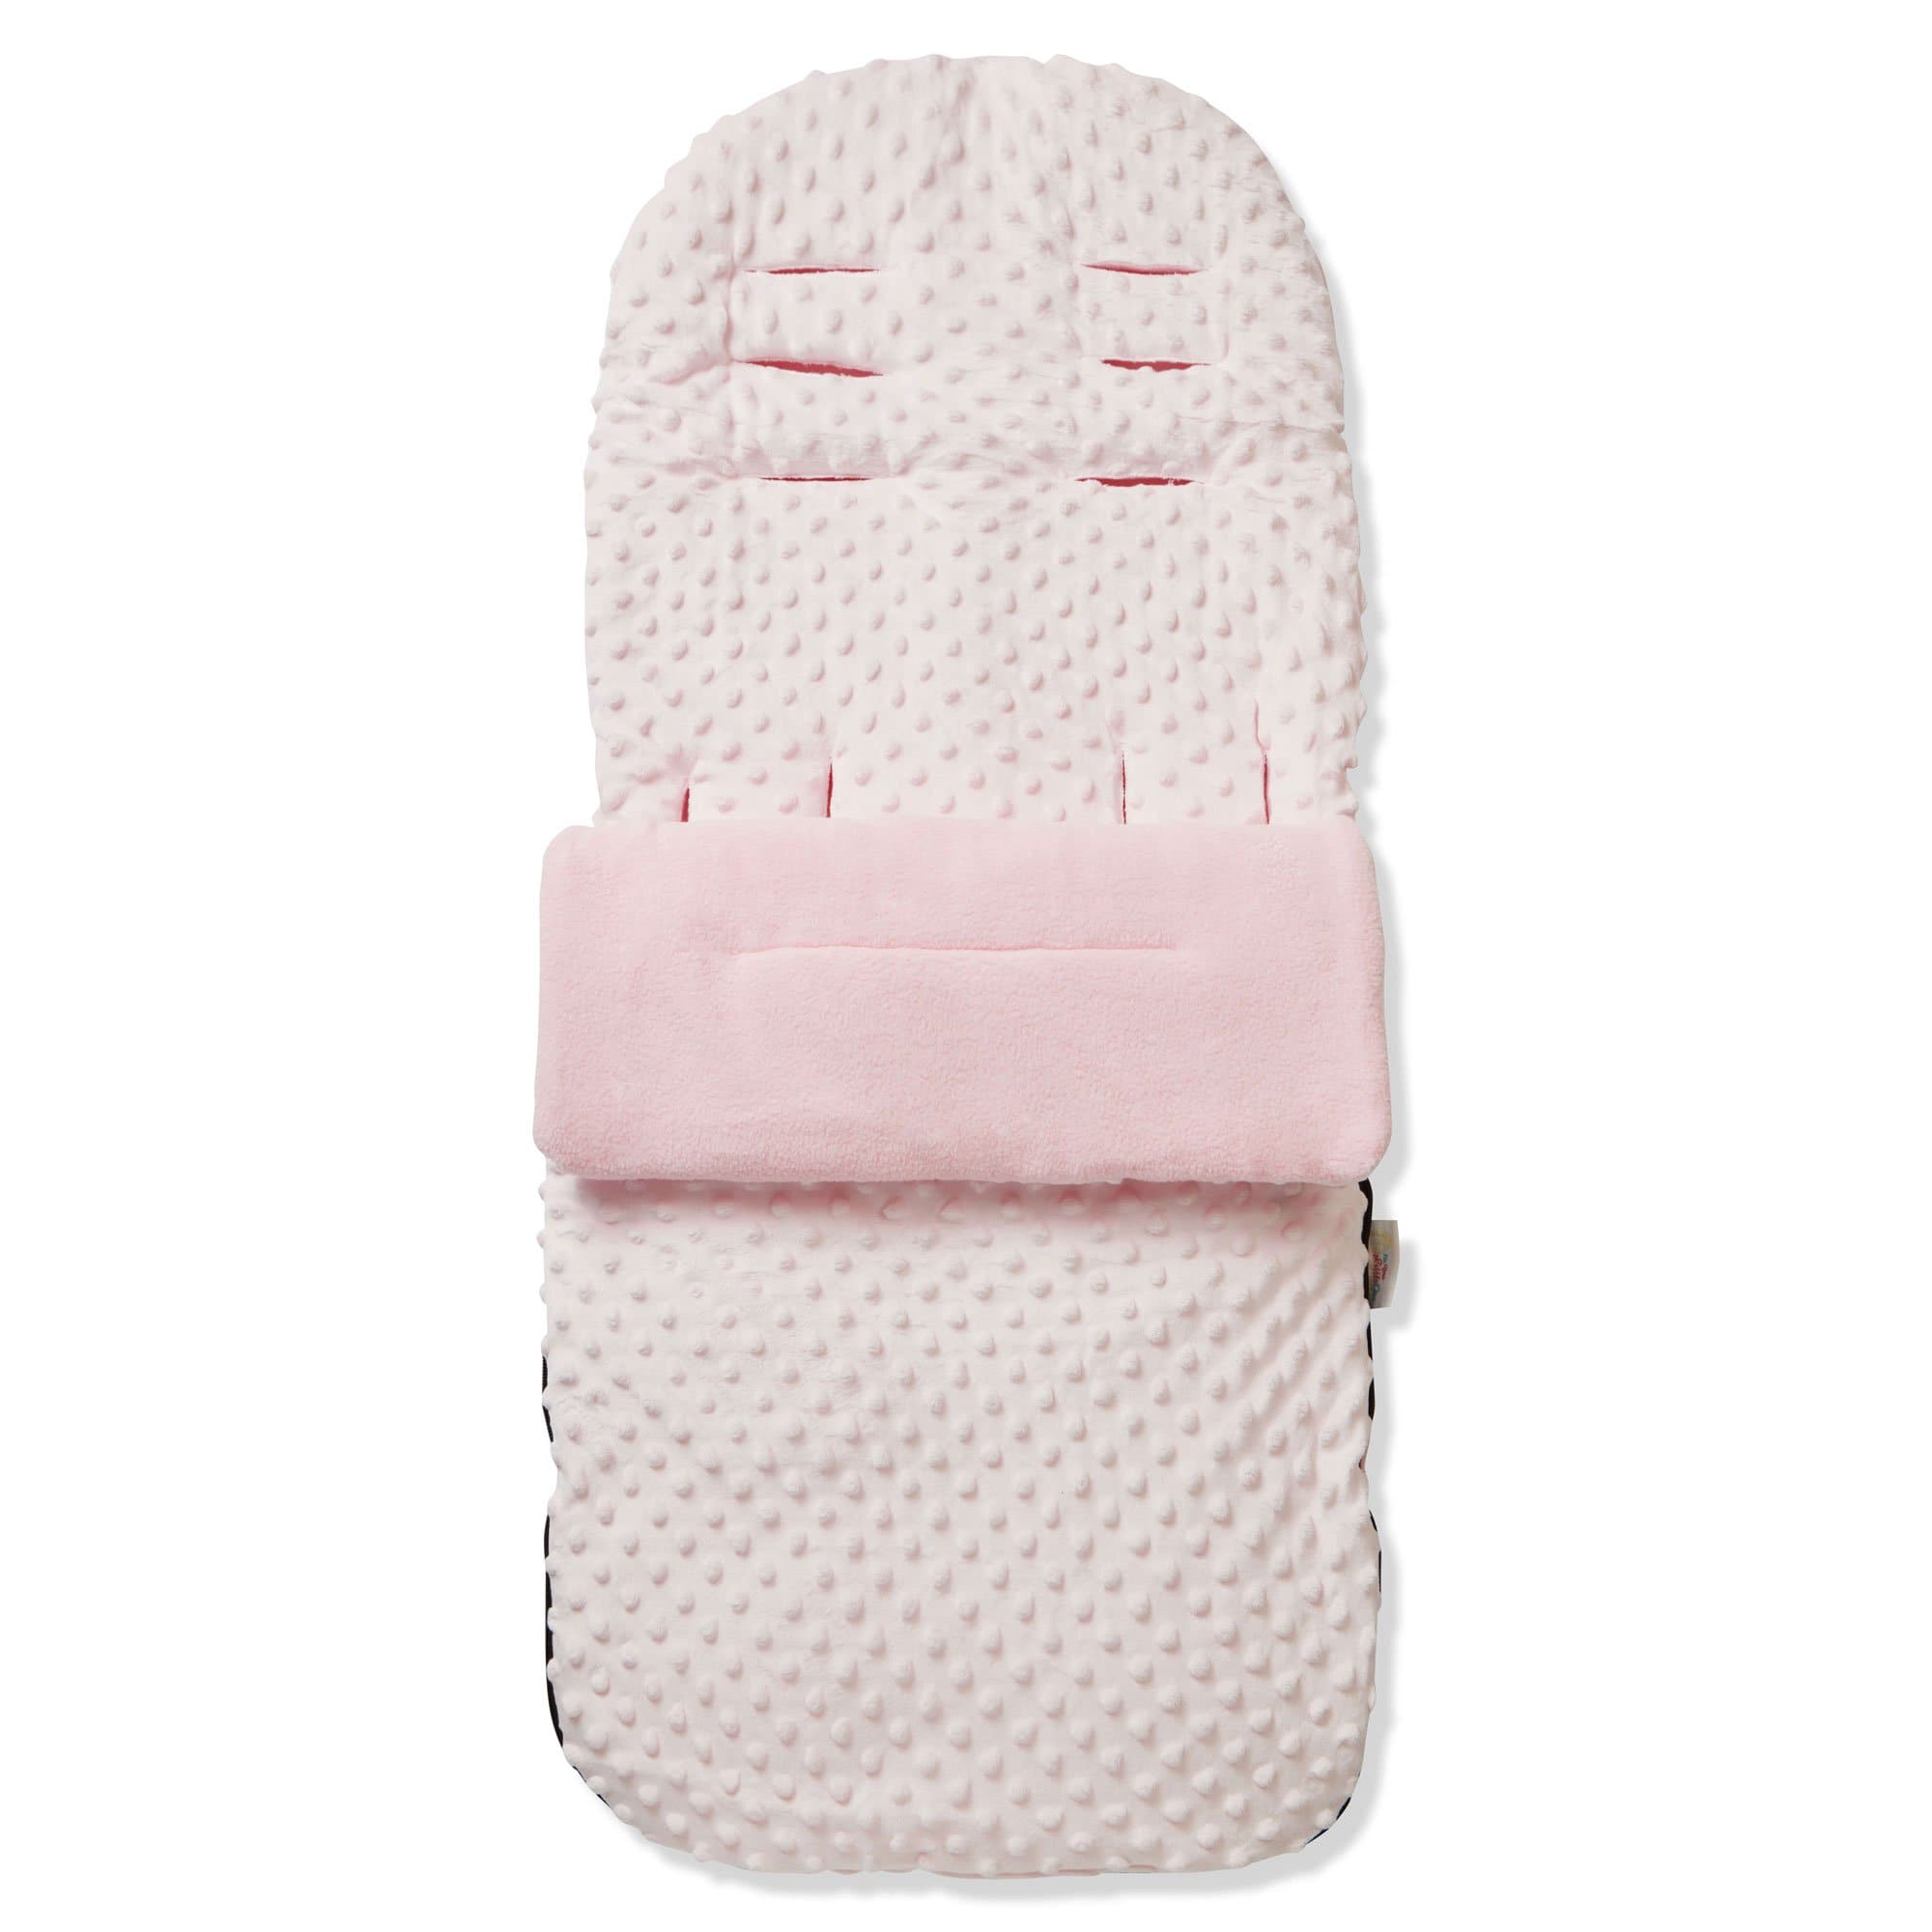 Dimple Footmuff / Cosy Toes Compatible with XTS - Pink / Fits All Models | For Your Little One